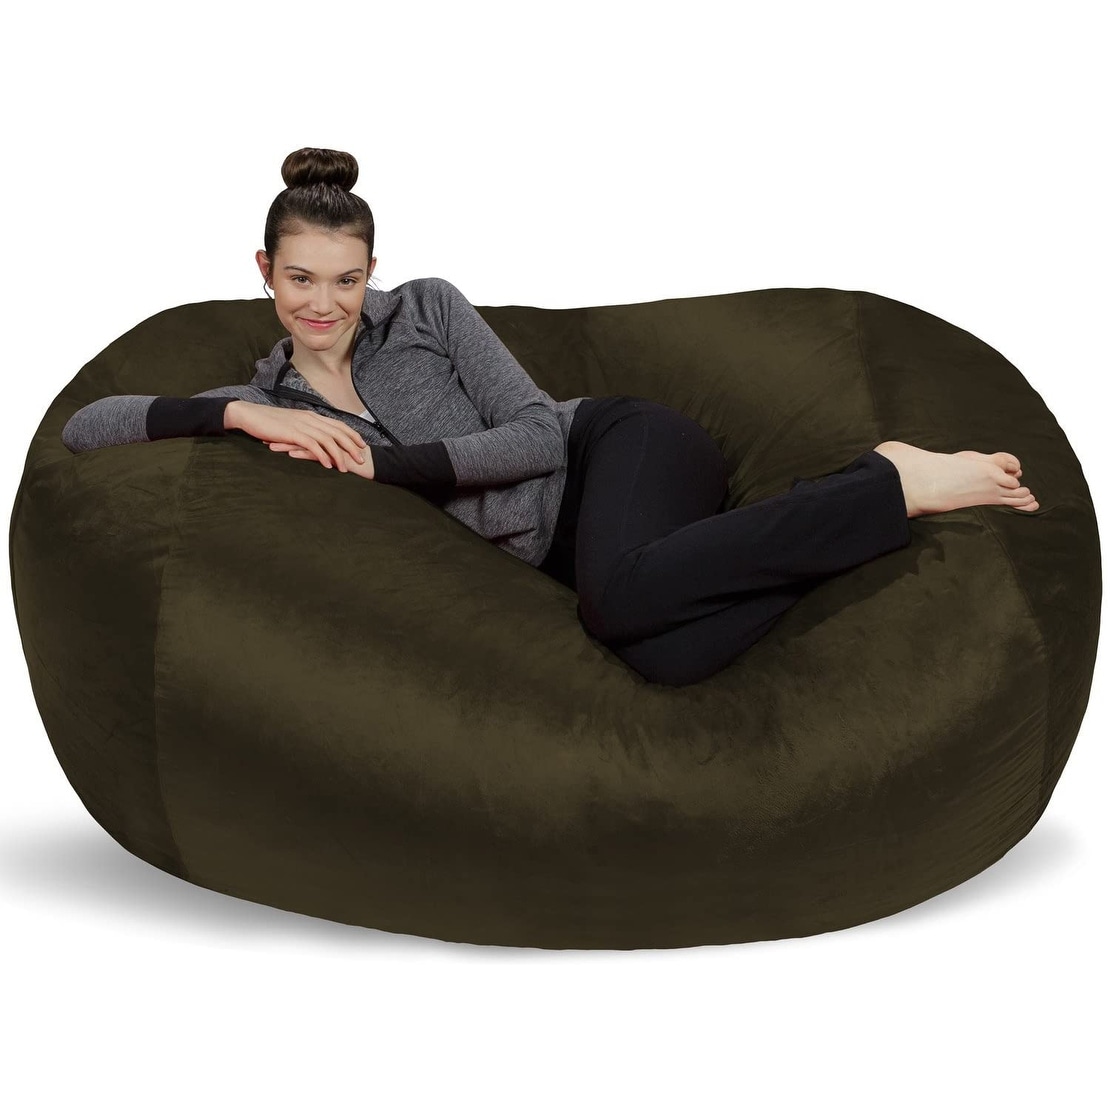 Big Huge Giant Bean Bag Chair for Adults, (No Filler) Bean Bag Chairs in  Multiple Sizes and Colors Giant Foam-Filled Furniture - Machine Washable